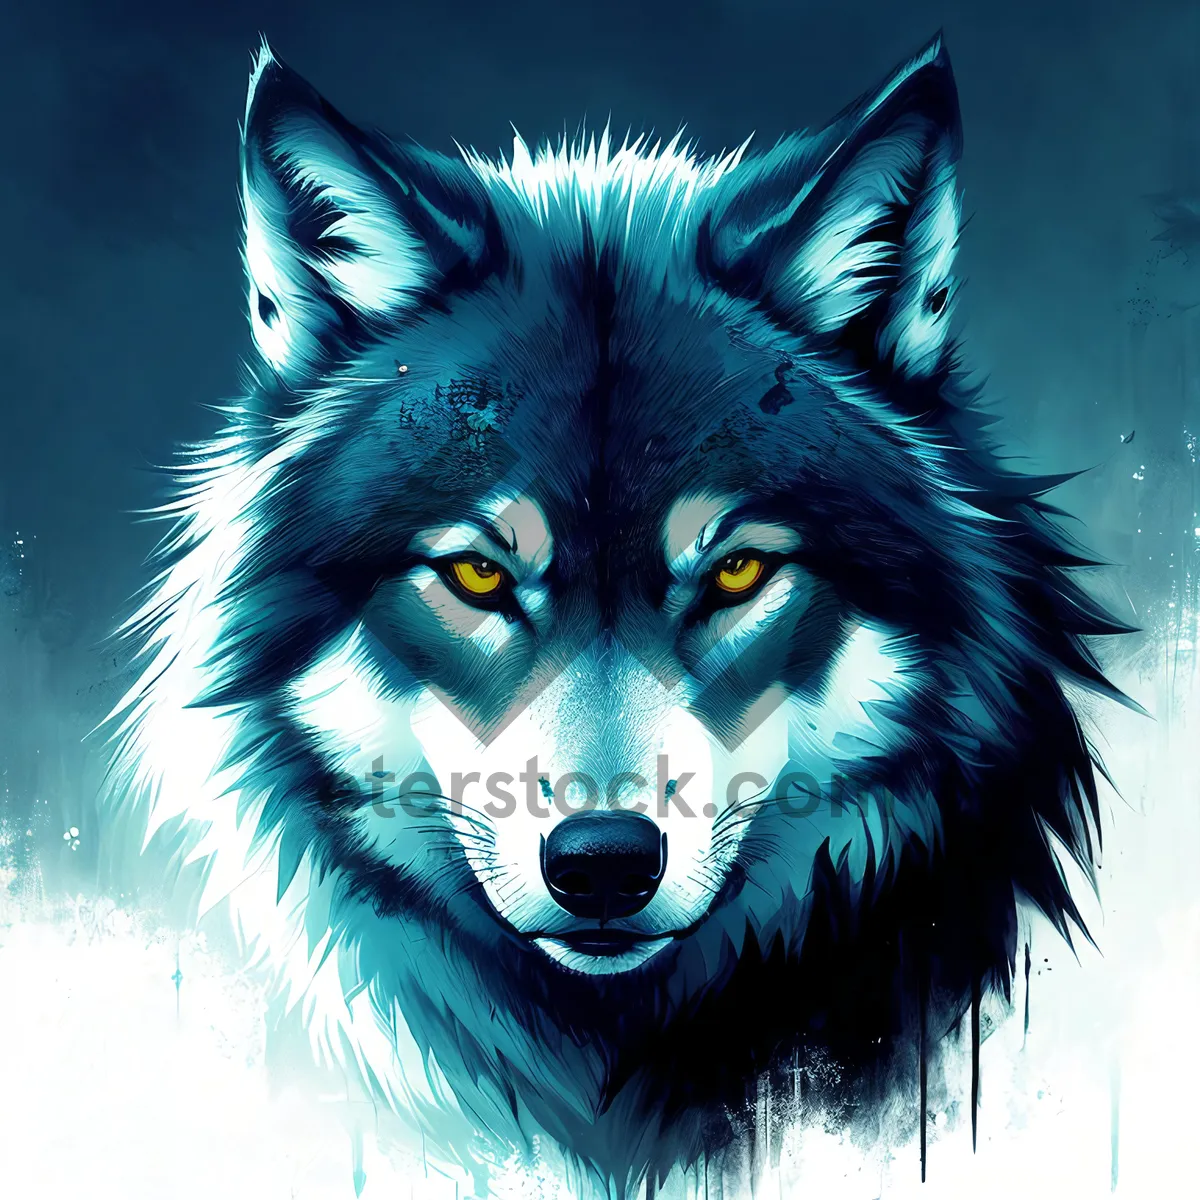 Picture of White Wolf: Majestic Canine Predator with Piercing Eyes